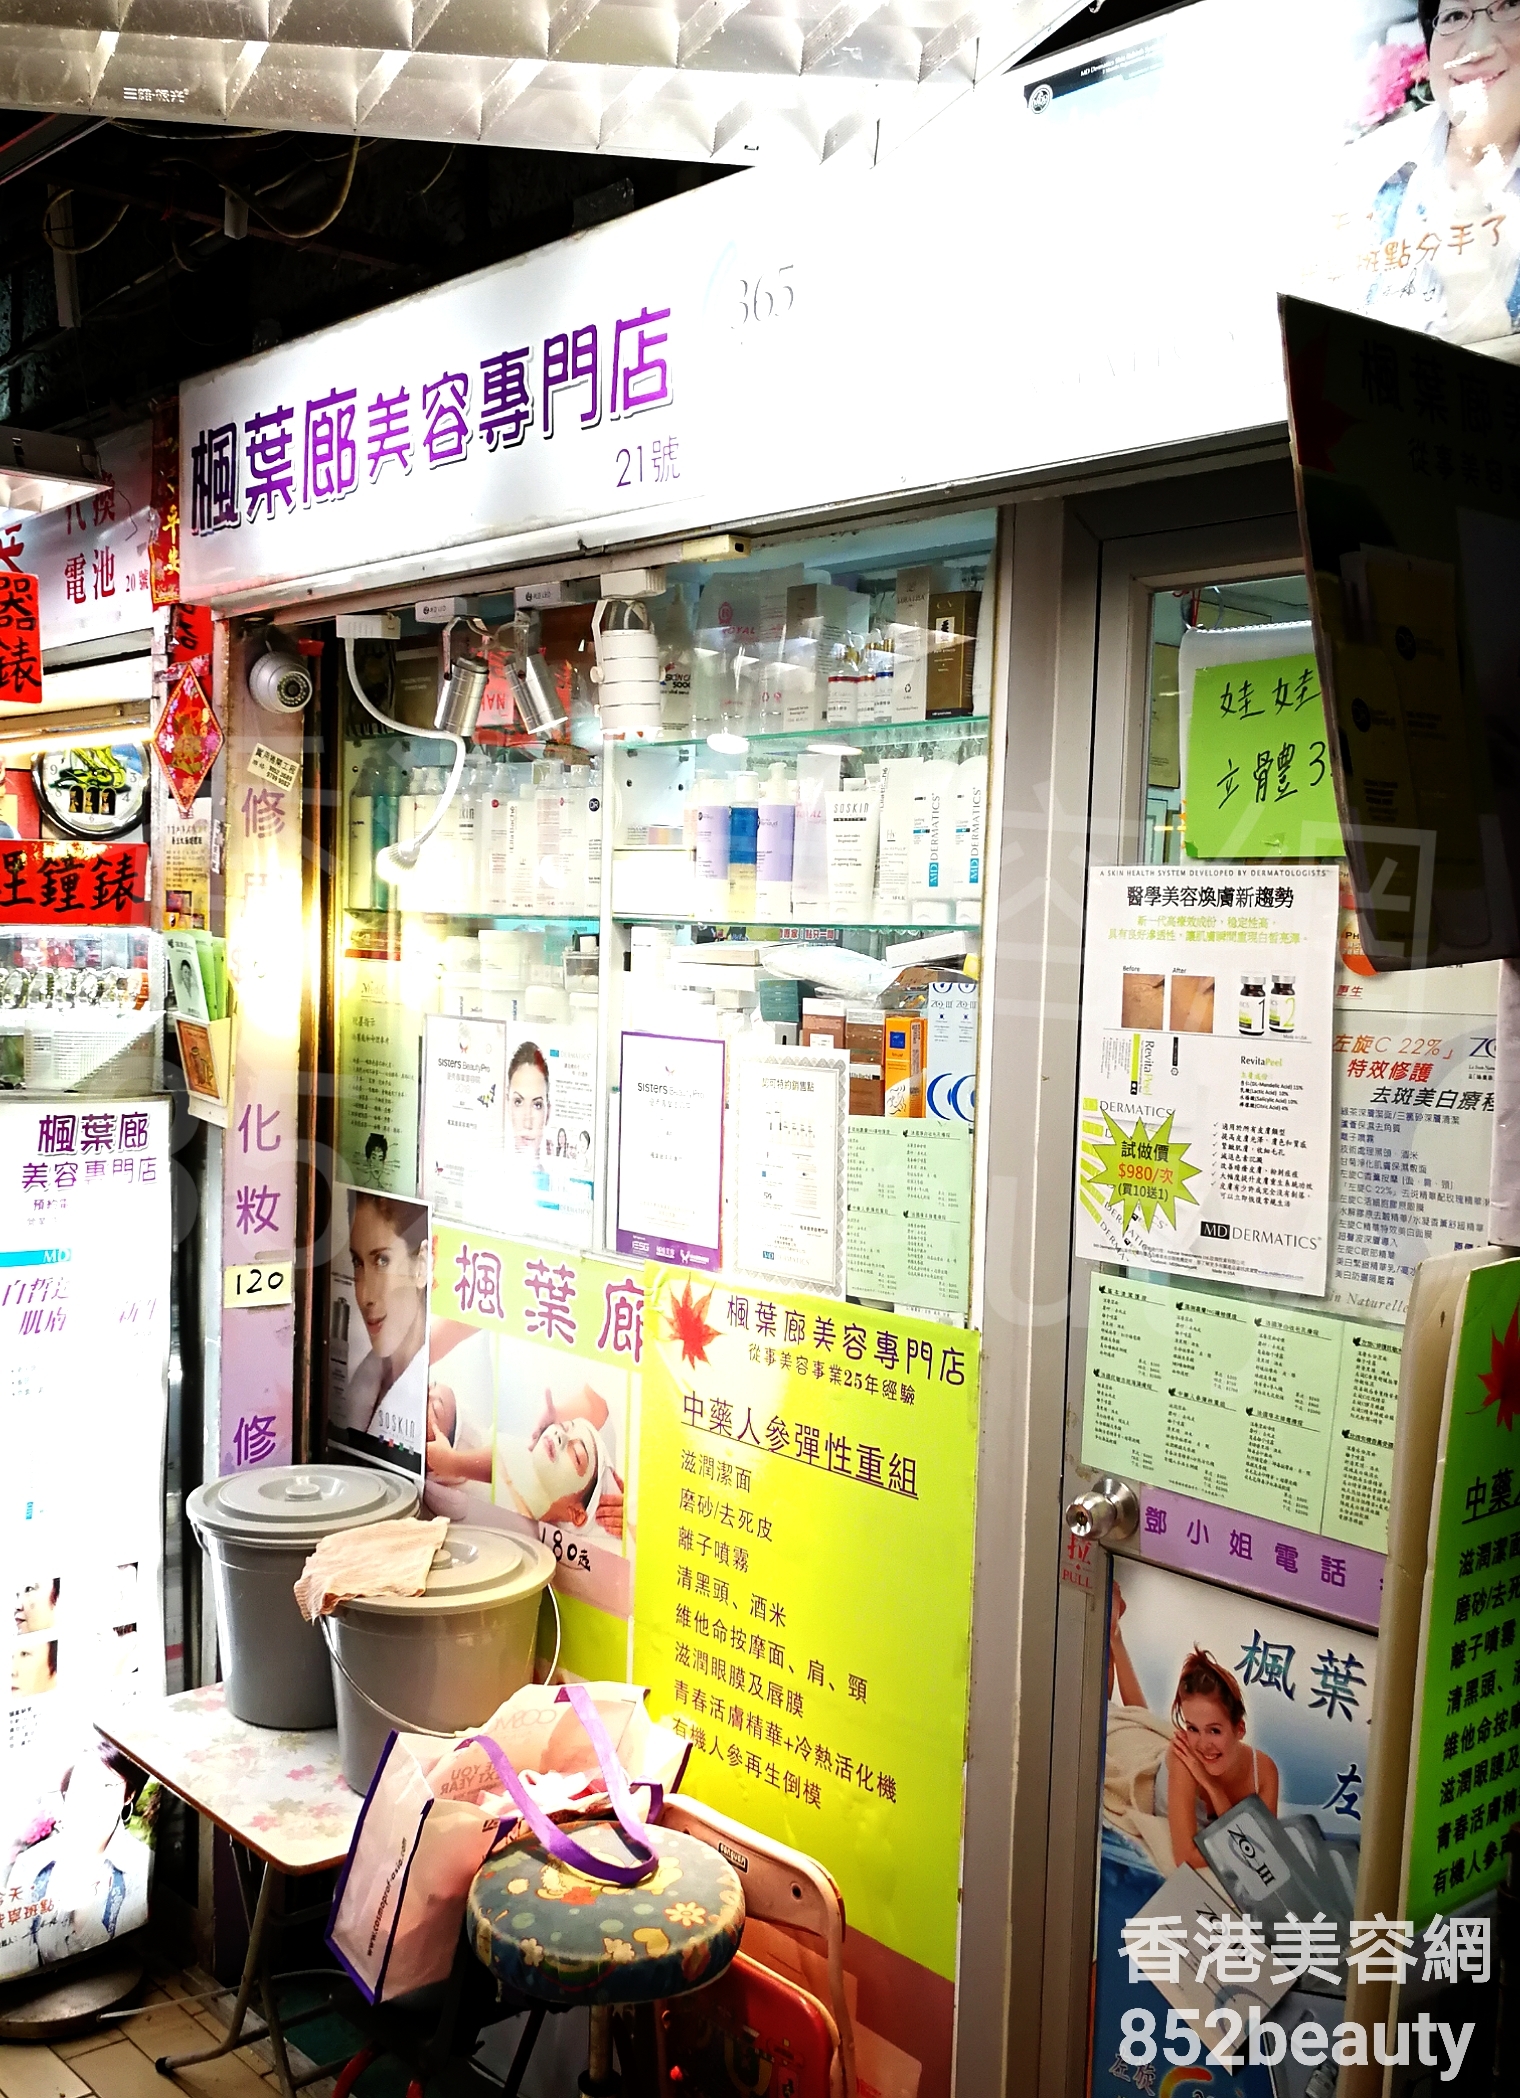 Hand and foot care: 楓葉廊美容專門店